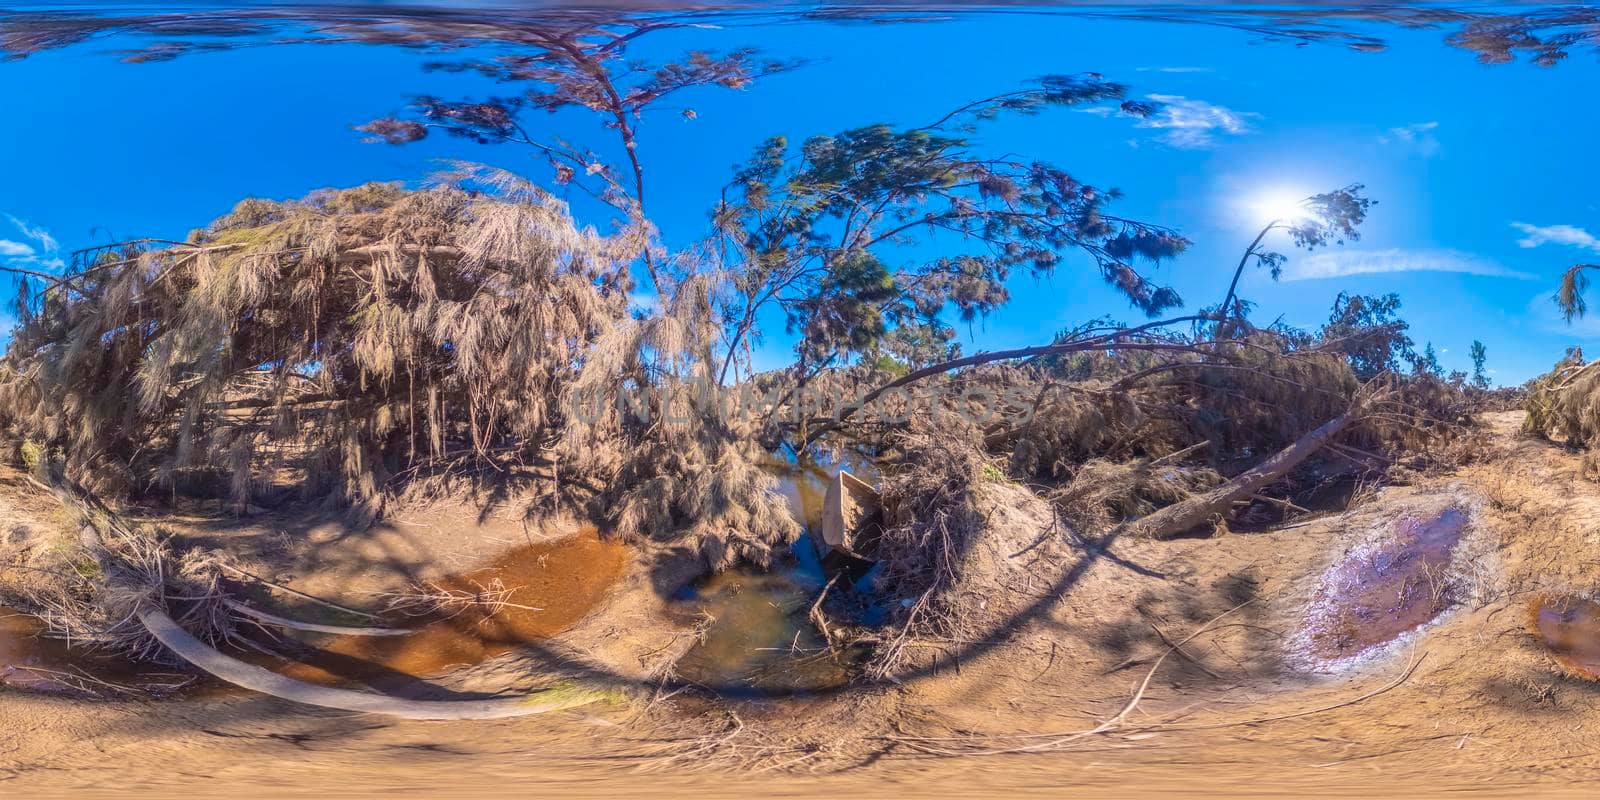 Spherical panoramic photograph of a small boat stuck in reeds after severe flooding in Yarramundi Reserve in the Hawkesbury region of New South Wales in Australia